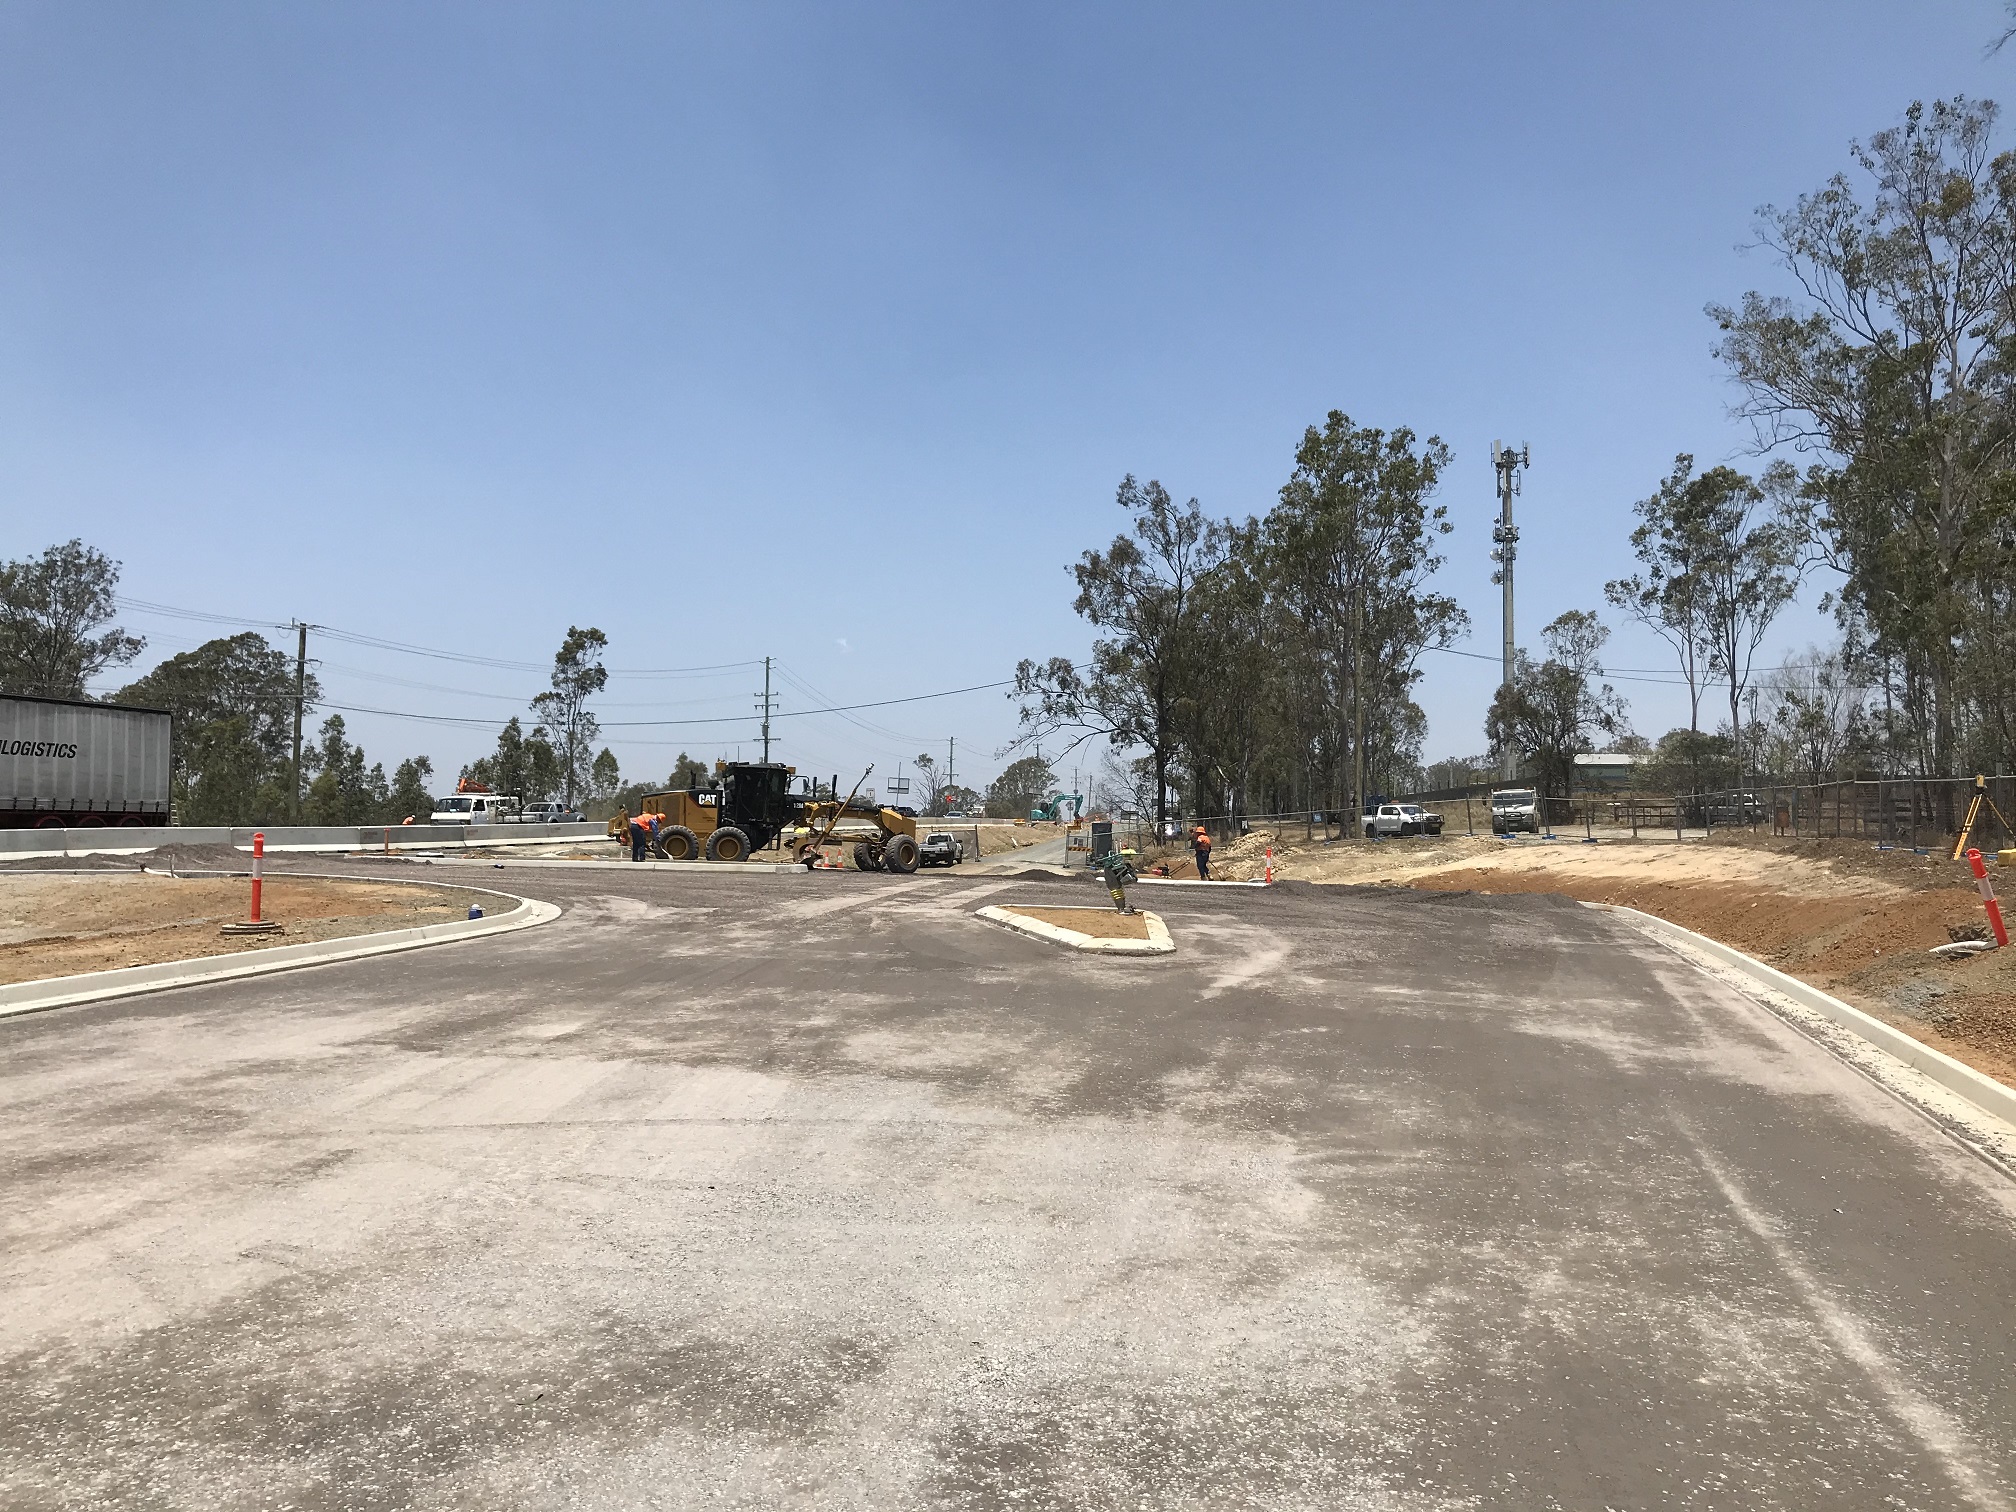 The Crest Road intersection with the Mount Lindesay Highway was reconstructed as part of the project